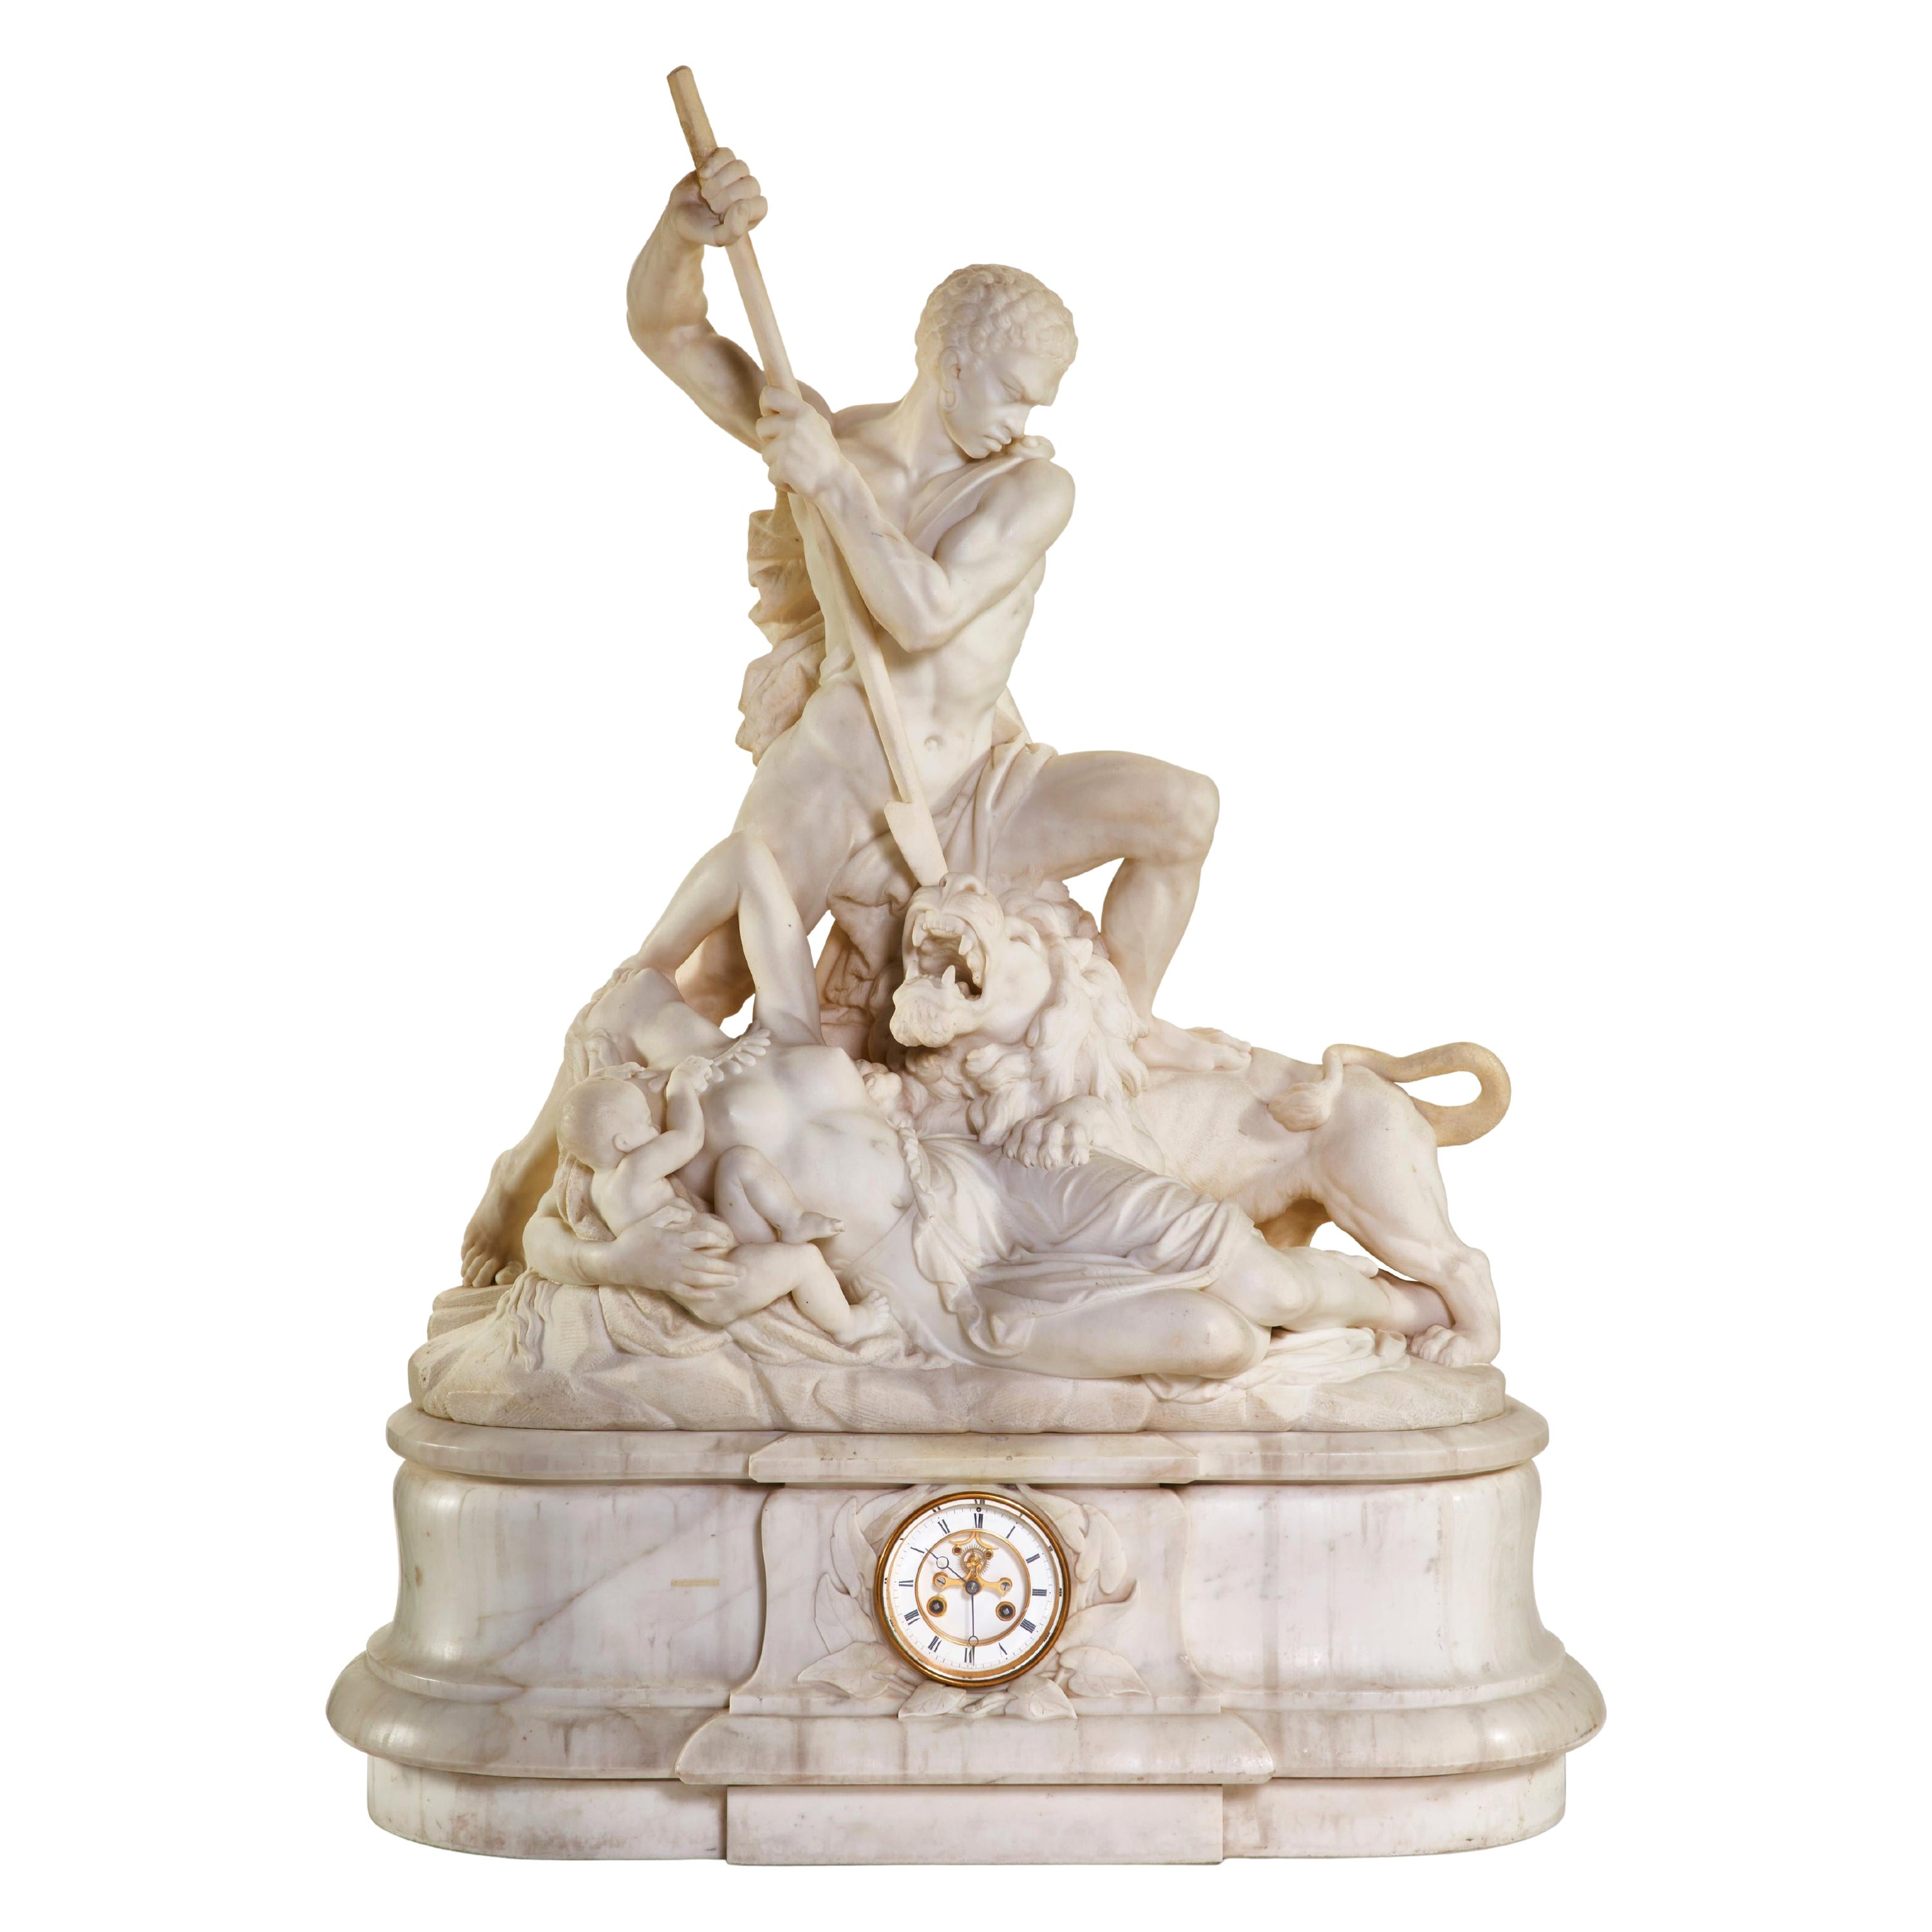 Exceptional White Marble Figural Sculpture Clock, "Nubian Slaying the Lion" For Sale